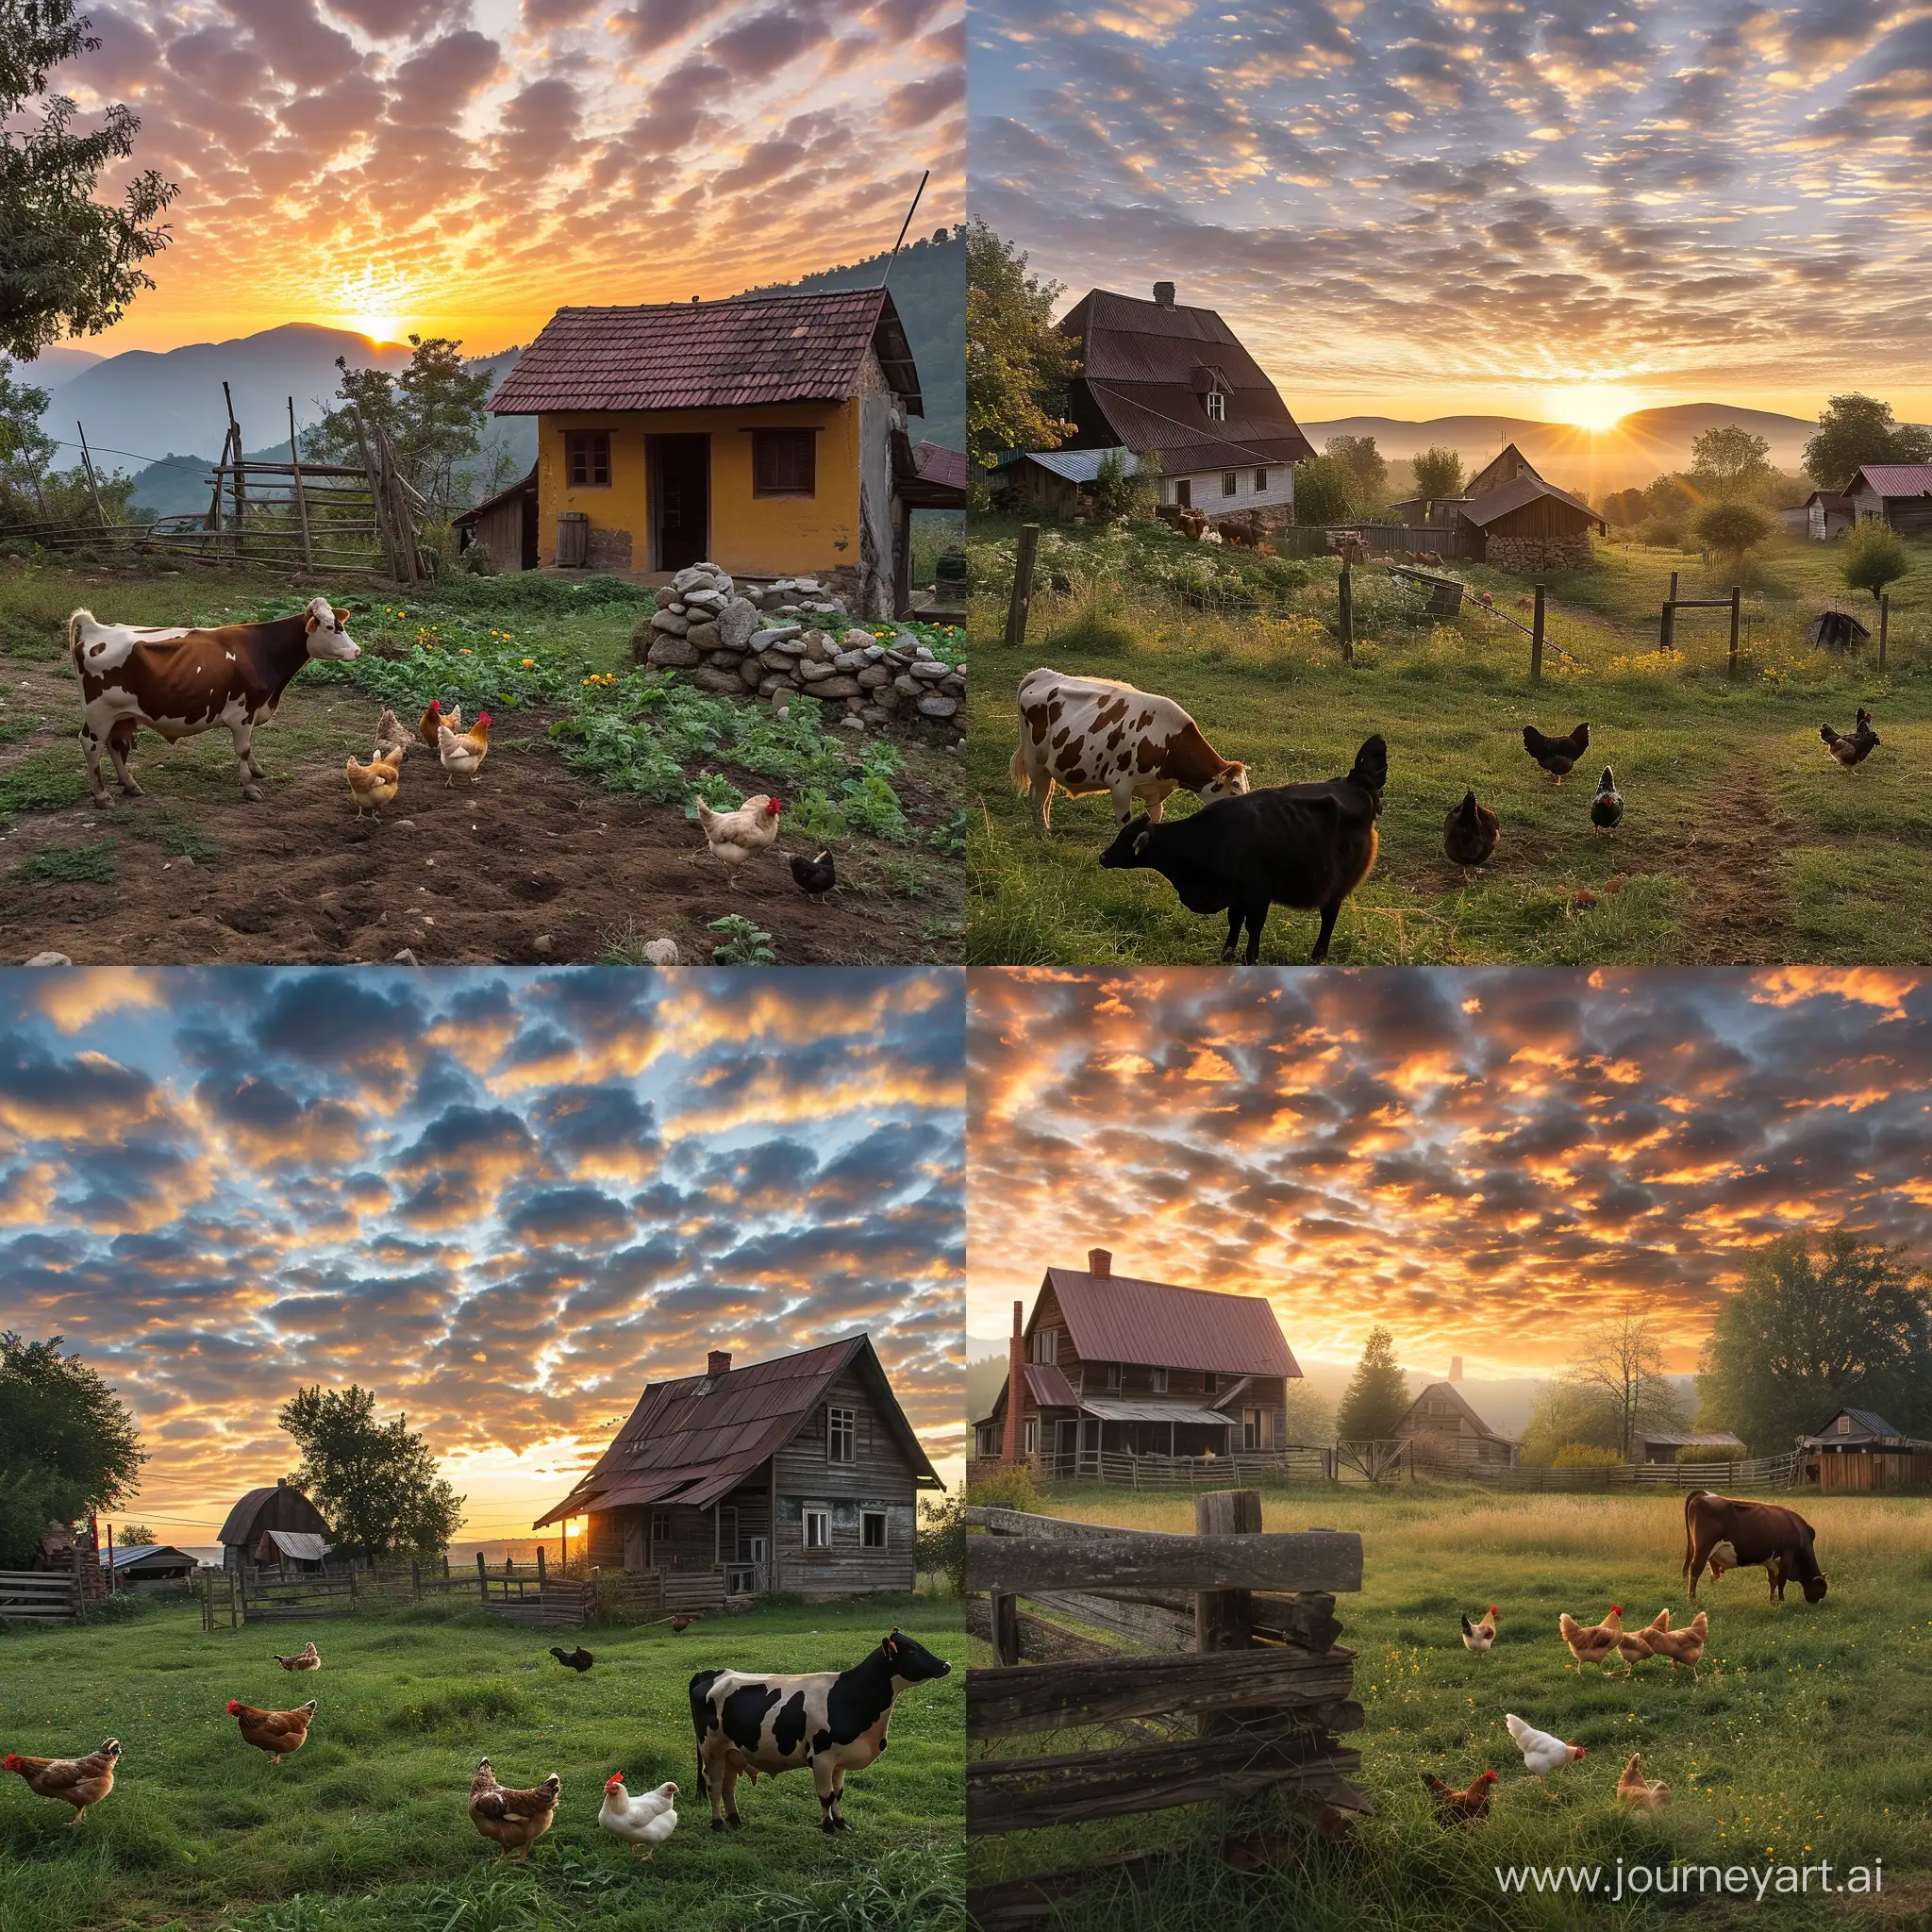 Rural-Sunrise-Village-with-Houses-Cows-and-Chickens